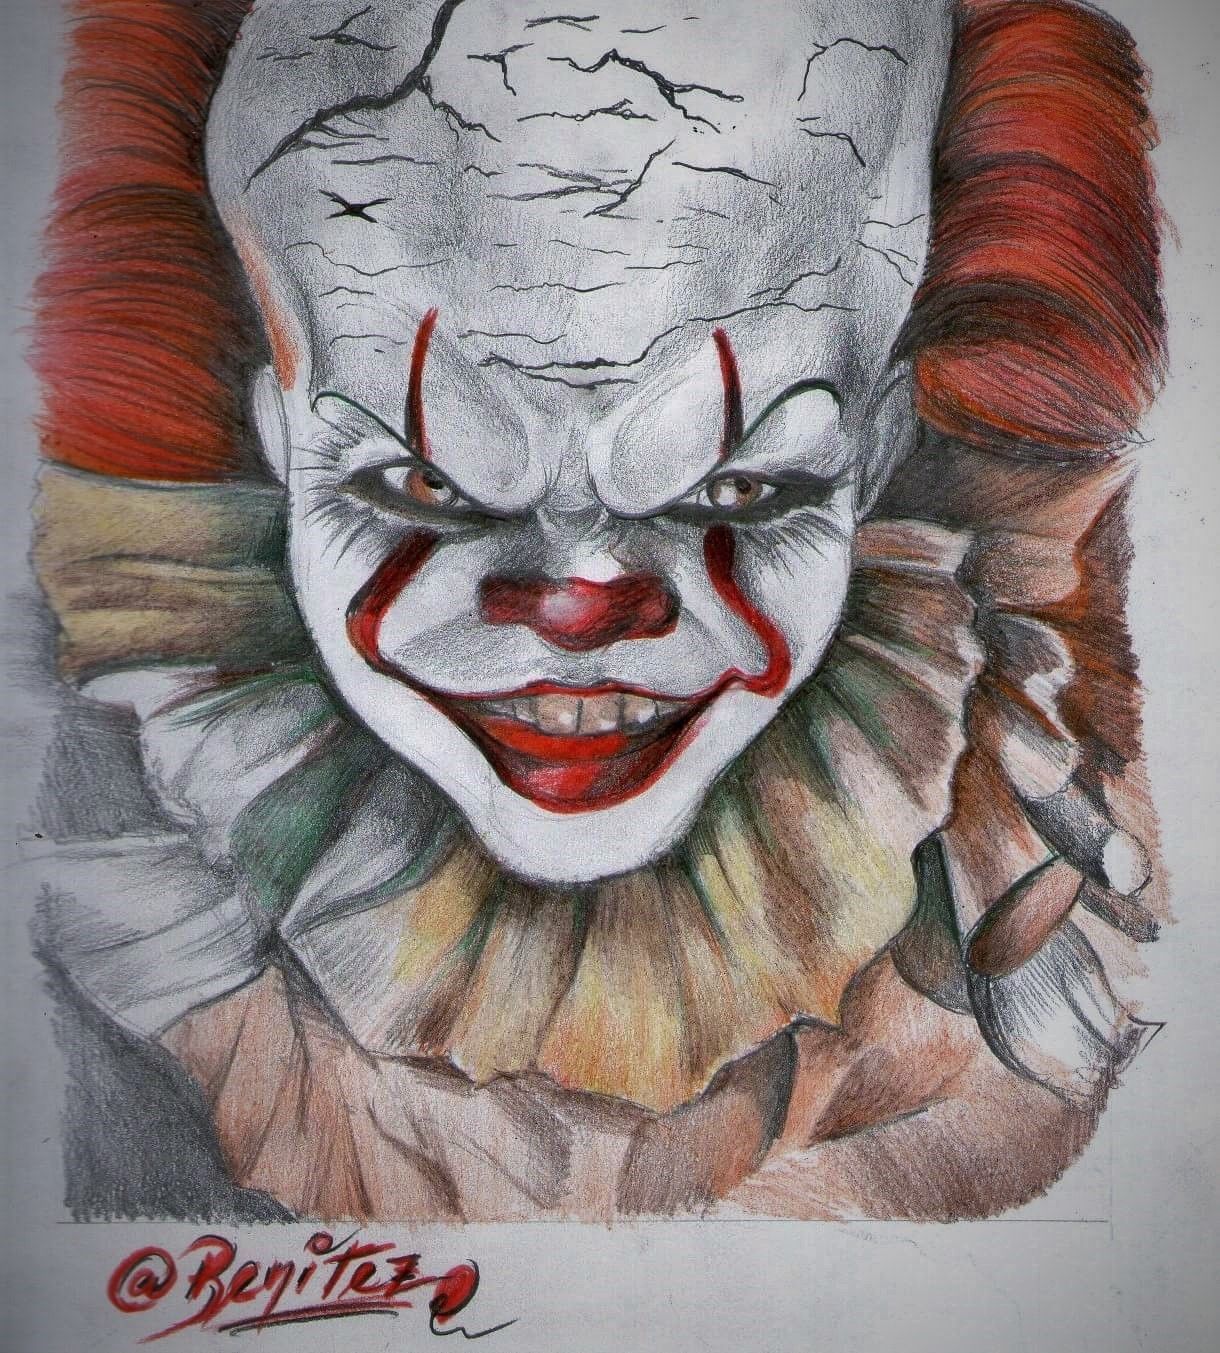 Today I share my fiftieth drawing, Pennywise, the Dancing Clown, an… by ben...